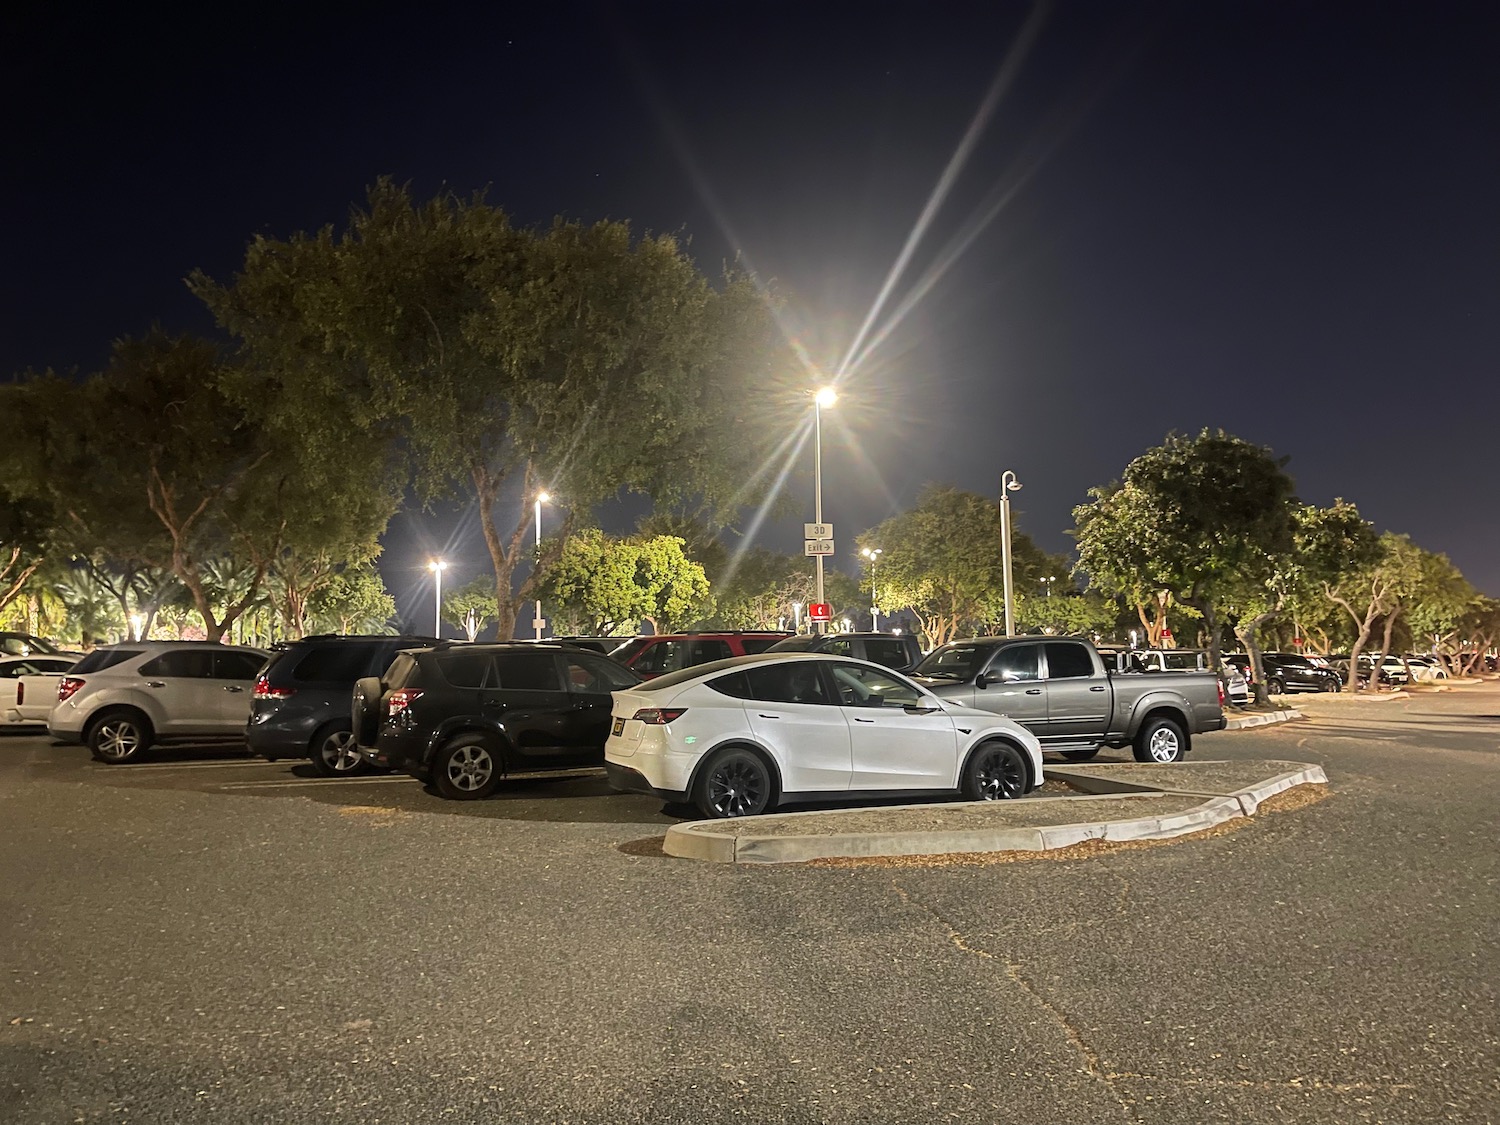 a parking lot with cars and trees at night